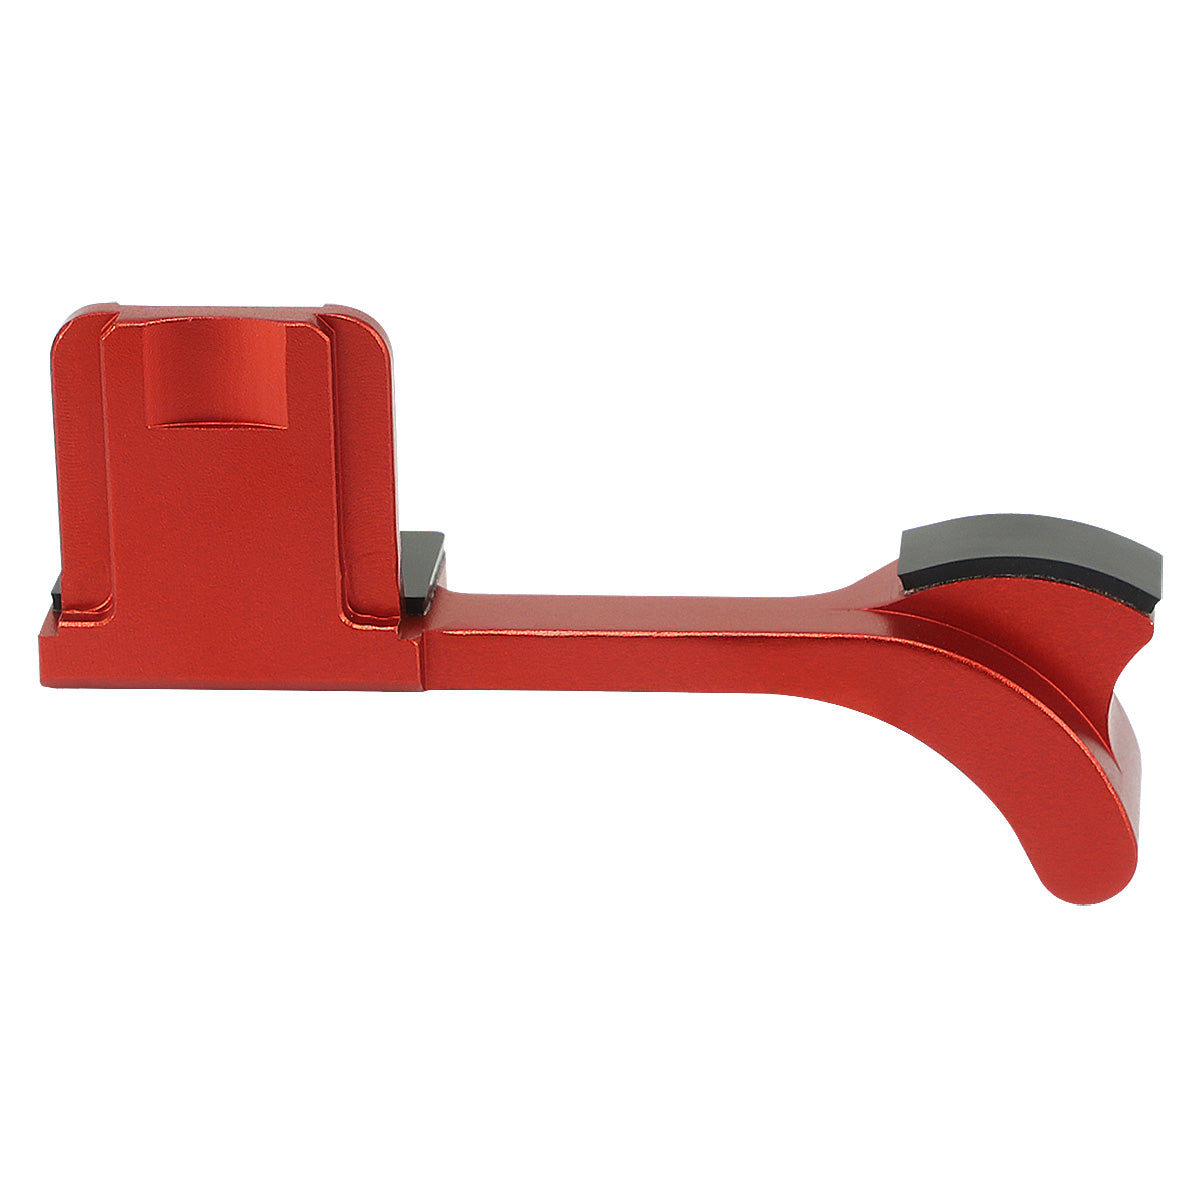 Haoge THB-QR Metal Hot Shoe Thumb Up Rest Thumbs Up Hand Grip for Leica Q2 Camera Red